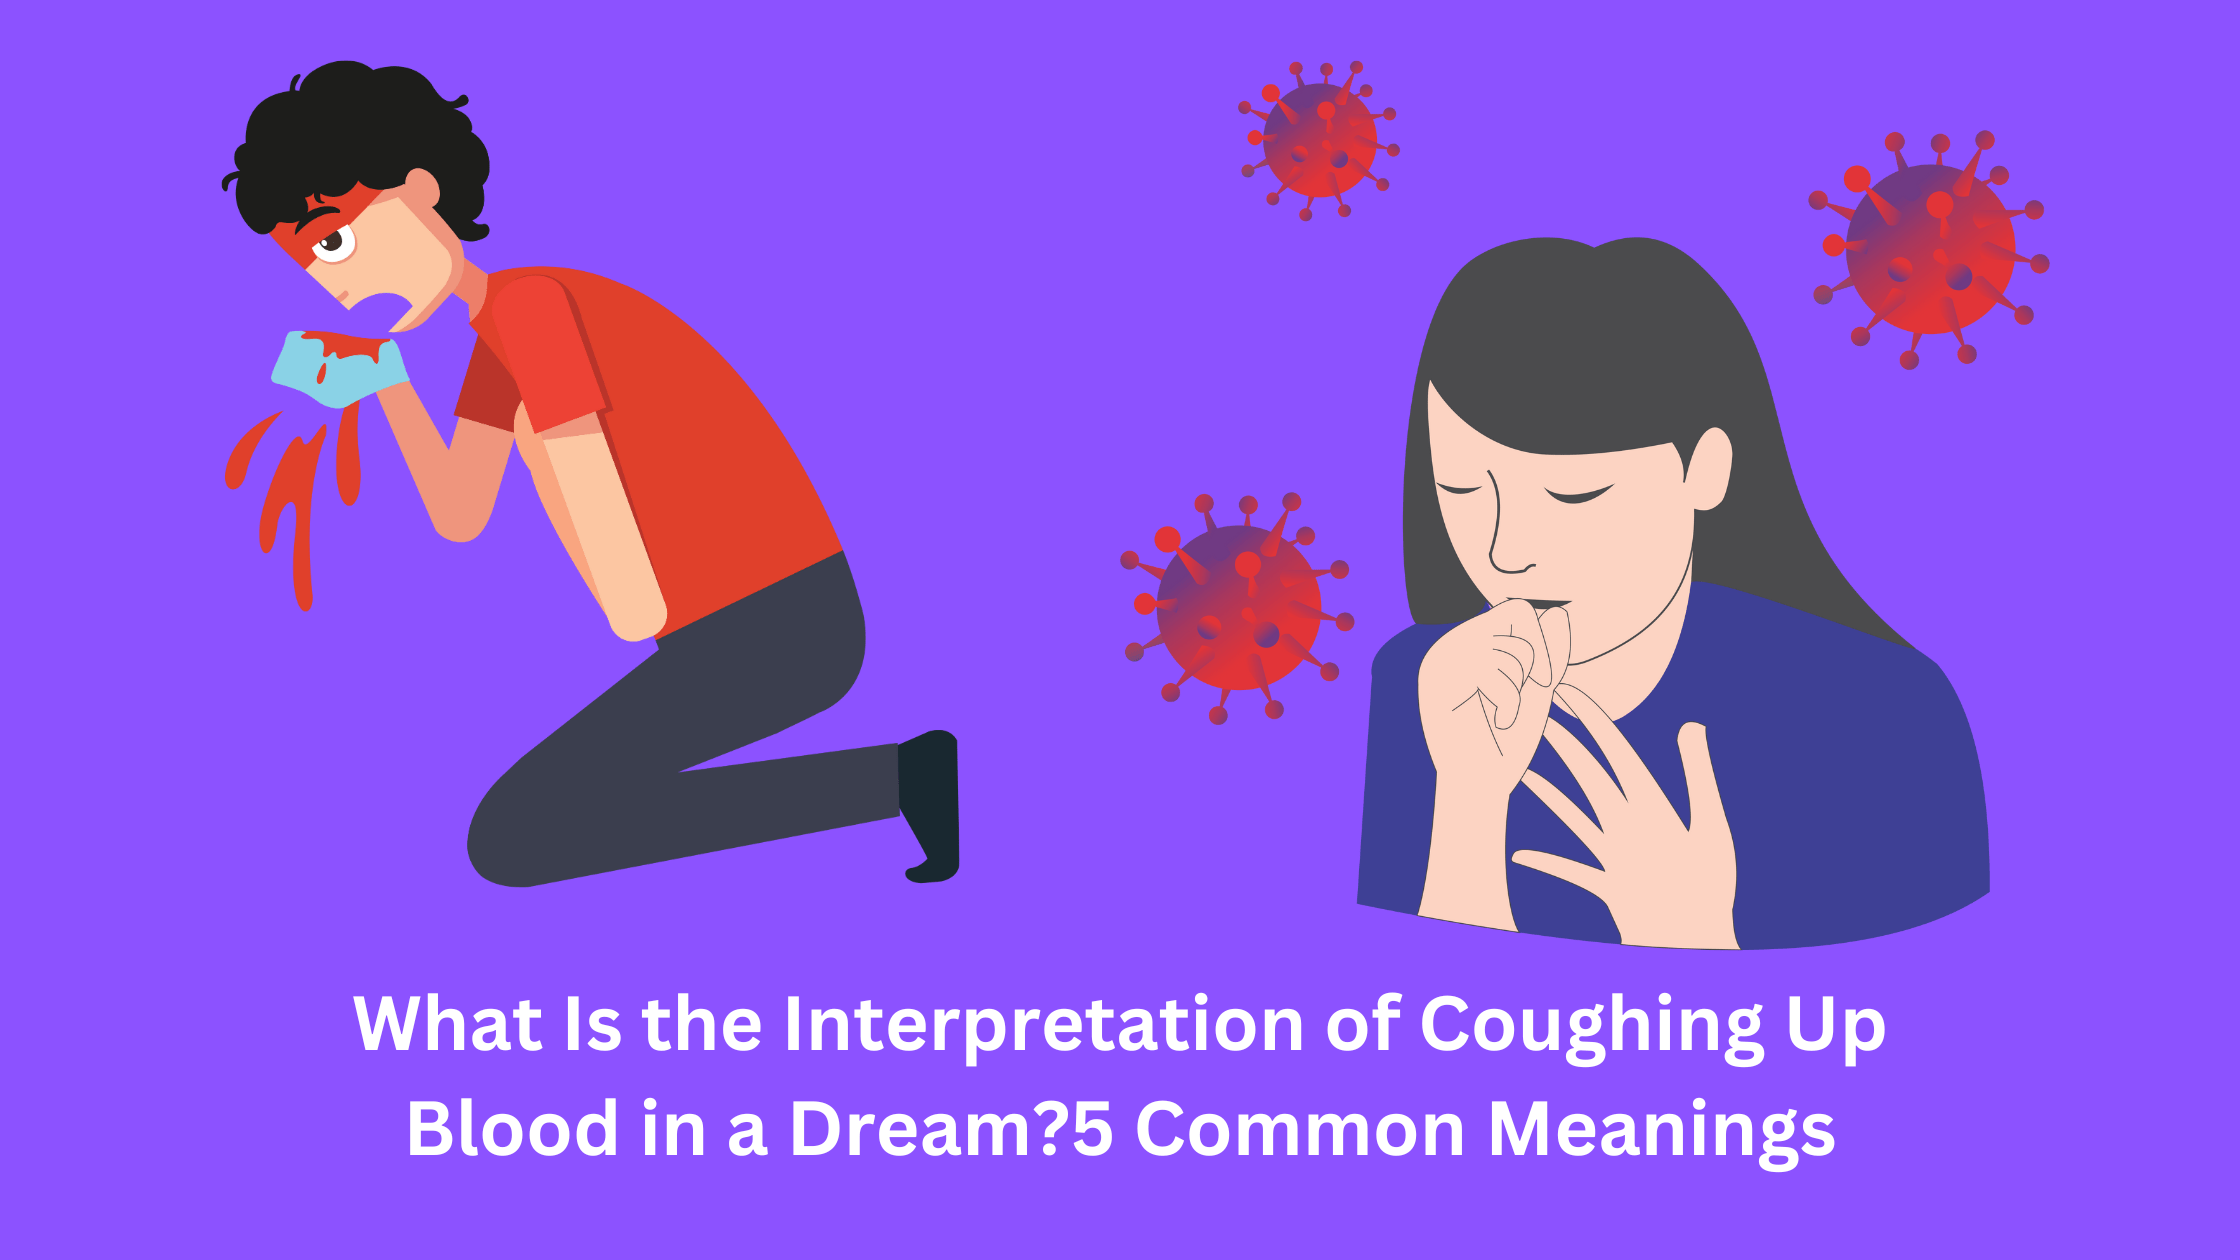 What Is the Interpretation of Coughing Up Blood in a Dream5 Common Meanings